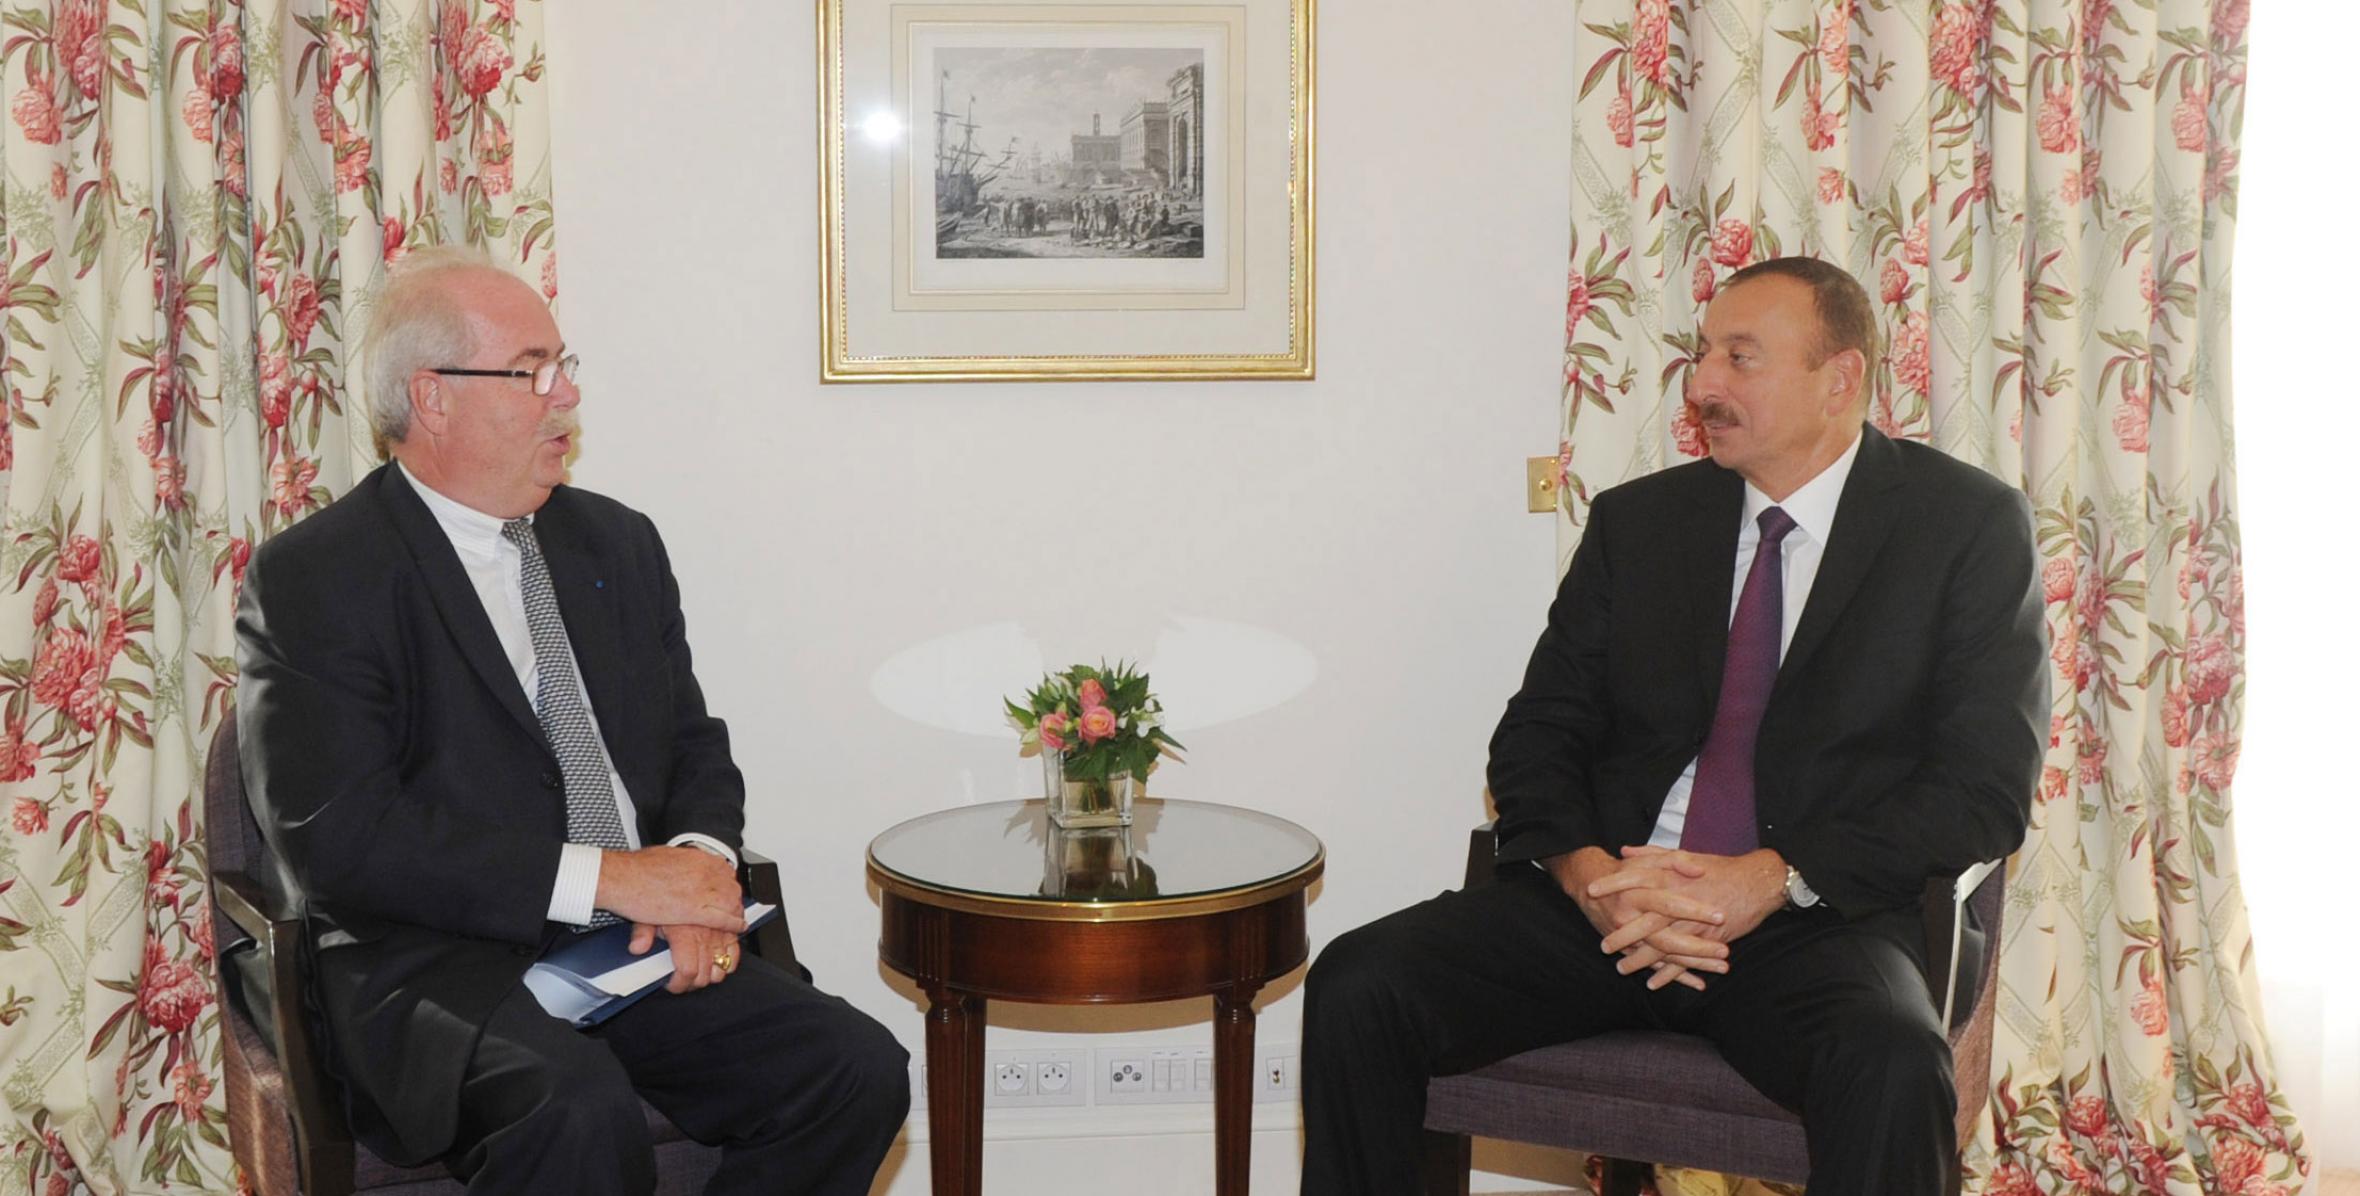 Ilham Aliyev met with Chief Executive Officer of Total, Christophe de Margerie